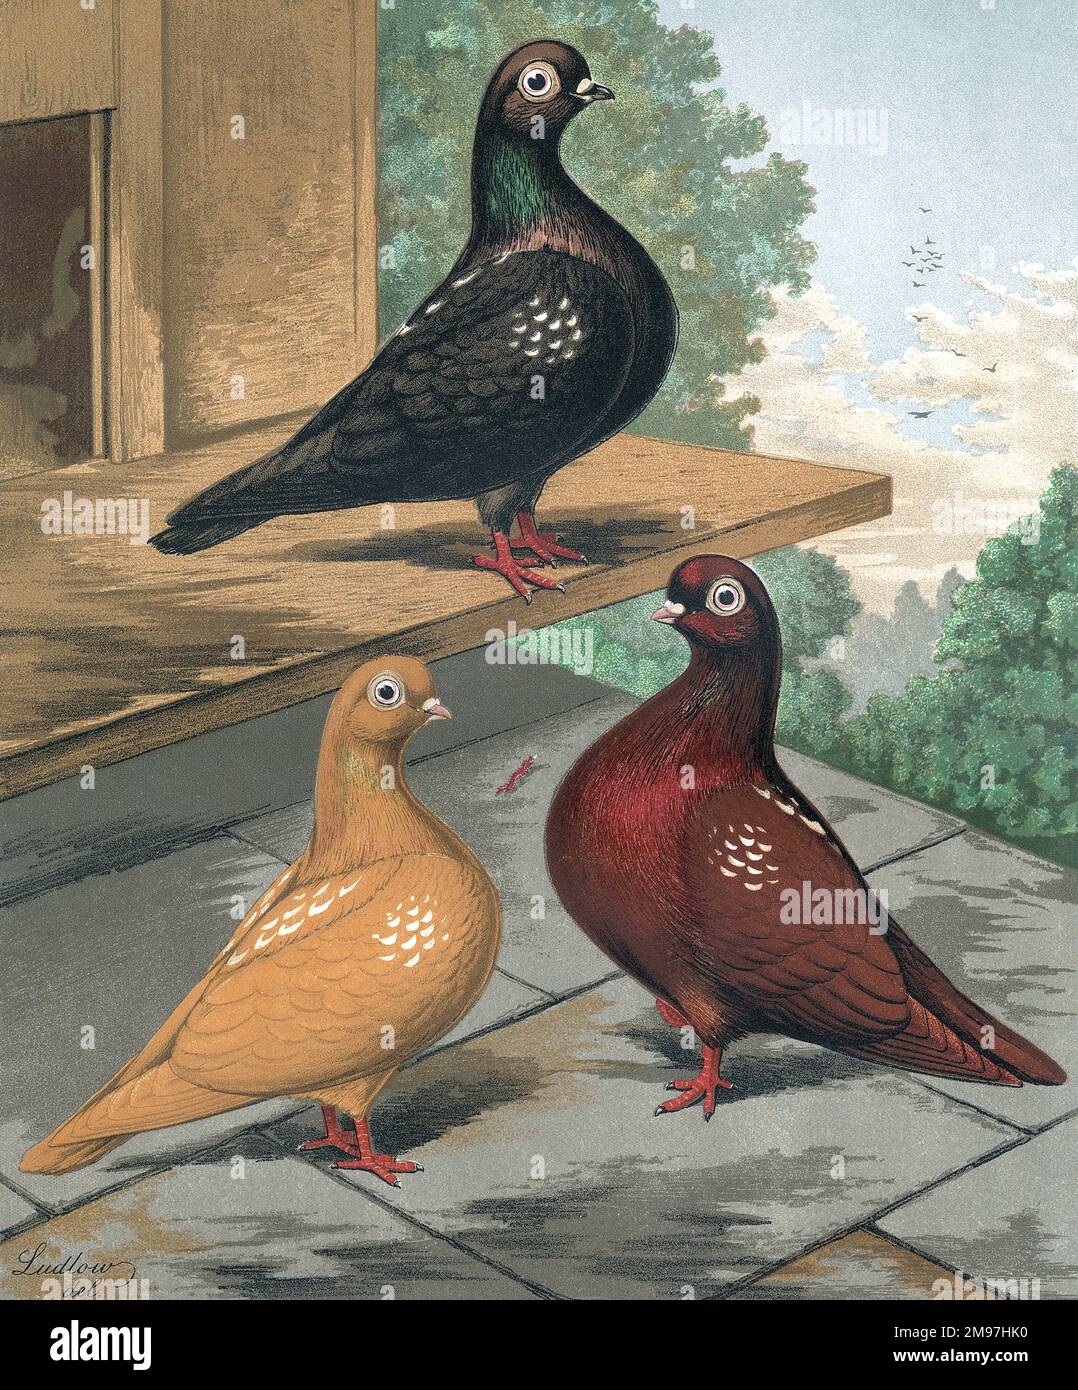 A portrait of three sub-variants of the Clean Legged Flying Tumbler pigeon breed. The variants shown are a Yellow-Mottled, Red-Mottled, a Black-Mottled, or a Rosewinced,. The full-bodied profiles of each pigeon present their unique coloration and markings. Stock Photo